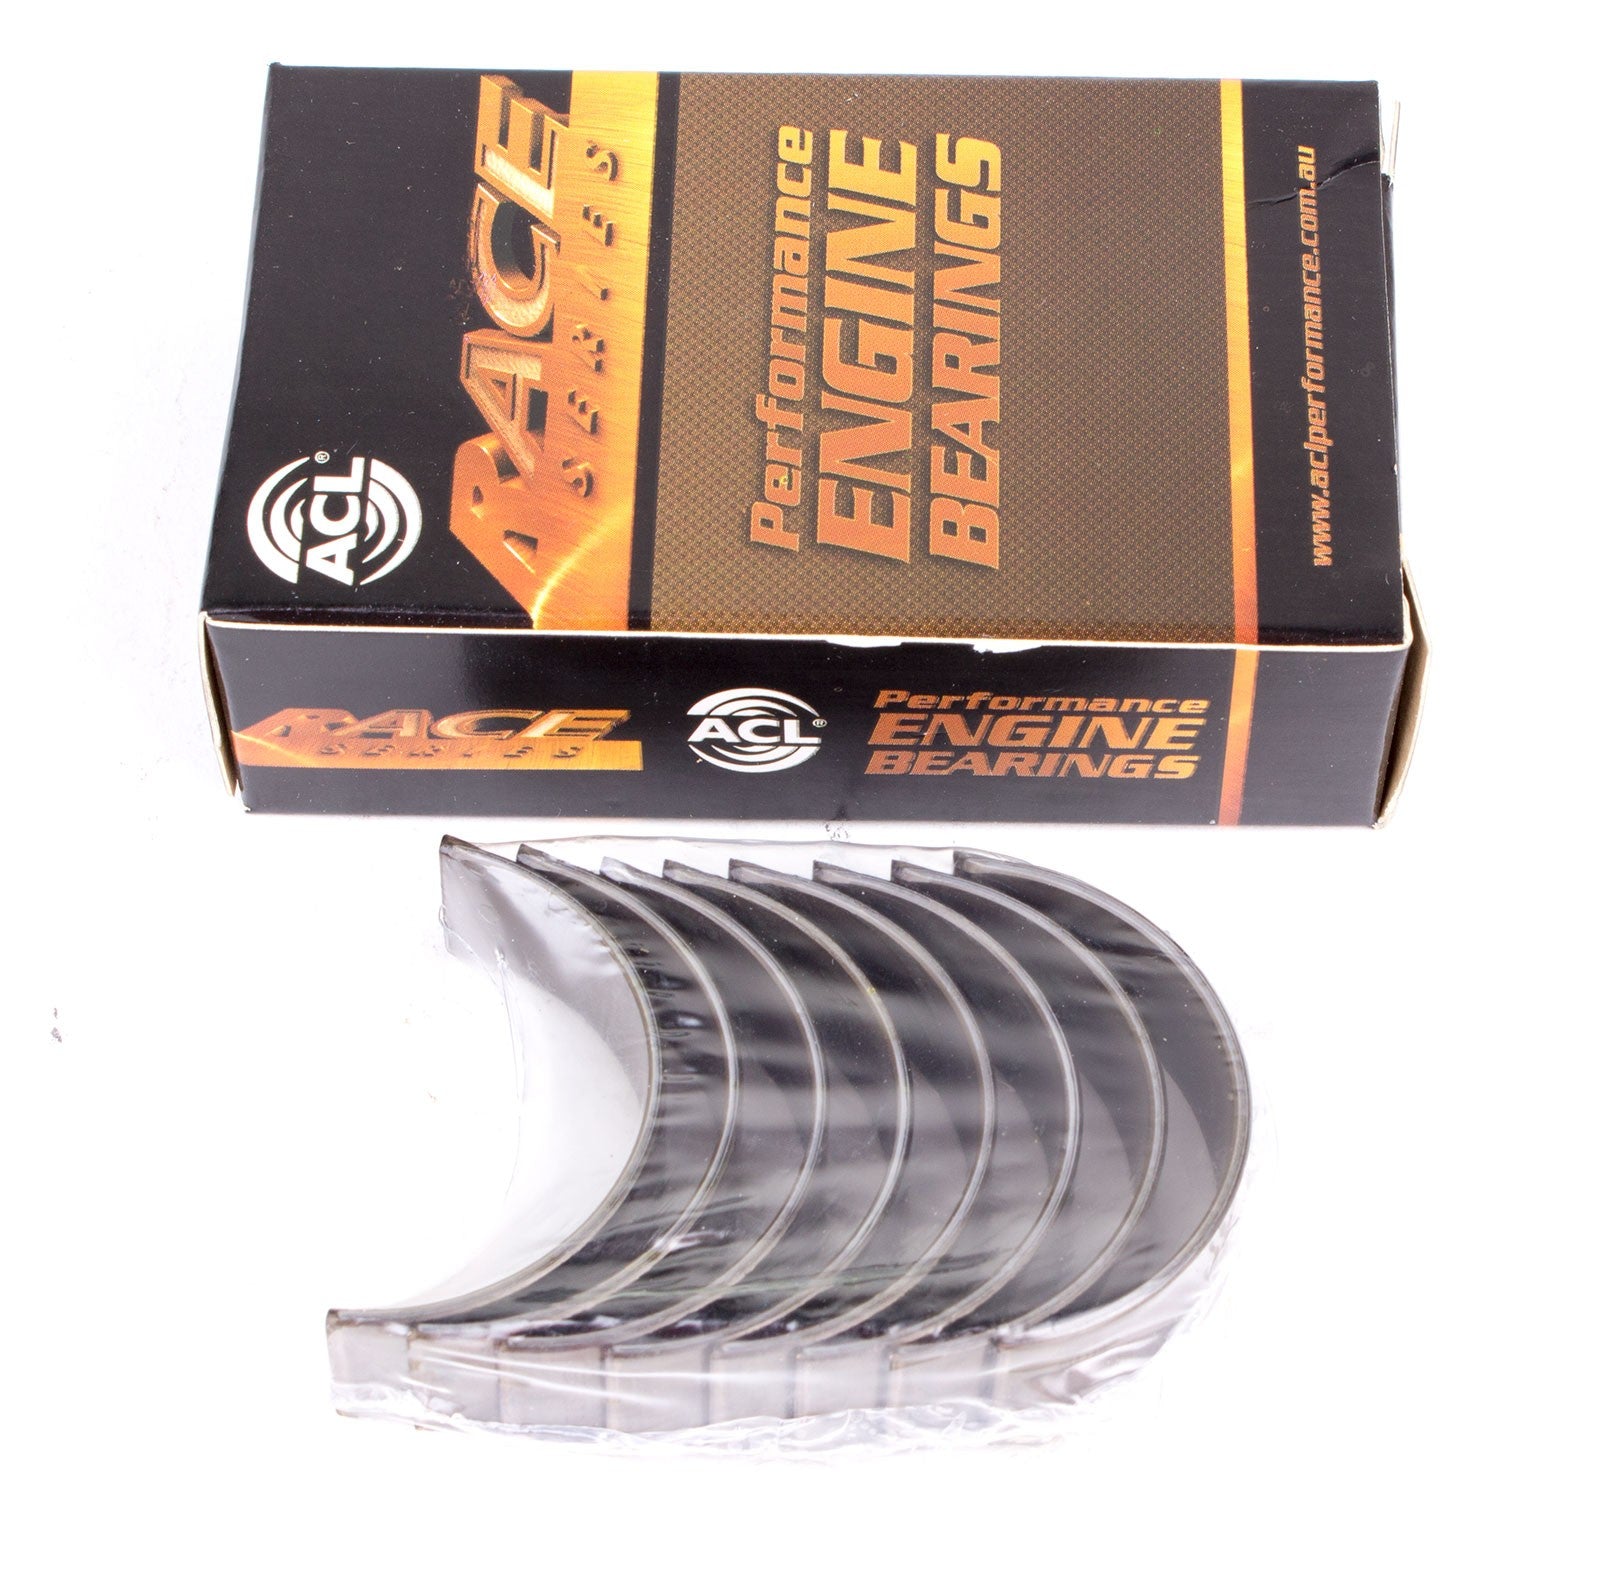 ACL 5M8361H-STD SP Main bearing set (ACL Race Series) Photo-0 